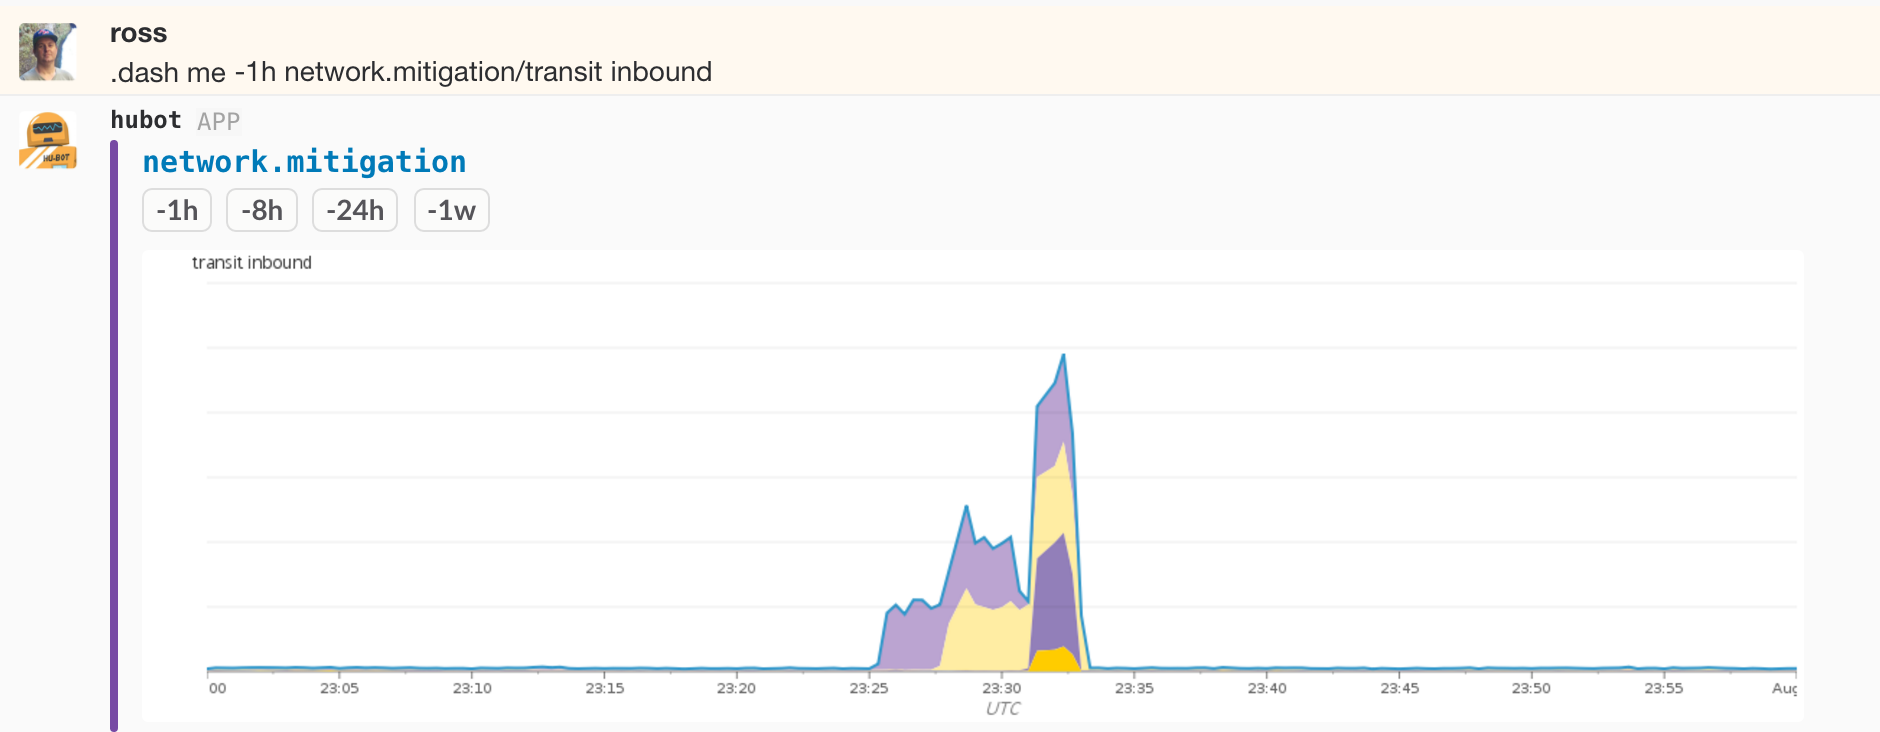 Bandwidth spike during a DDoS event